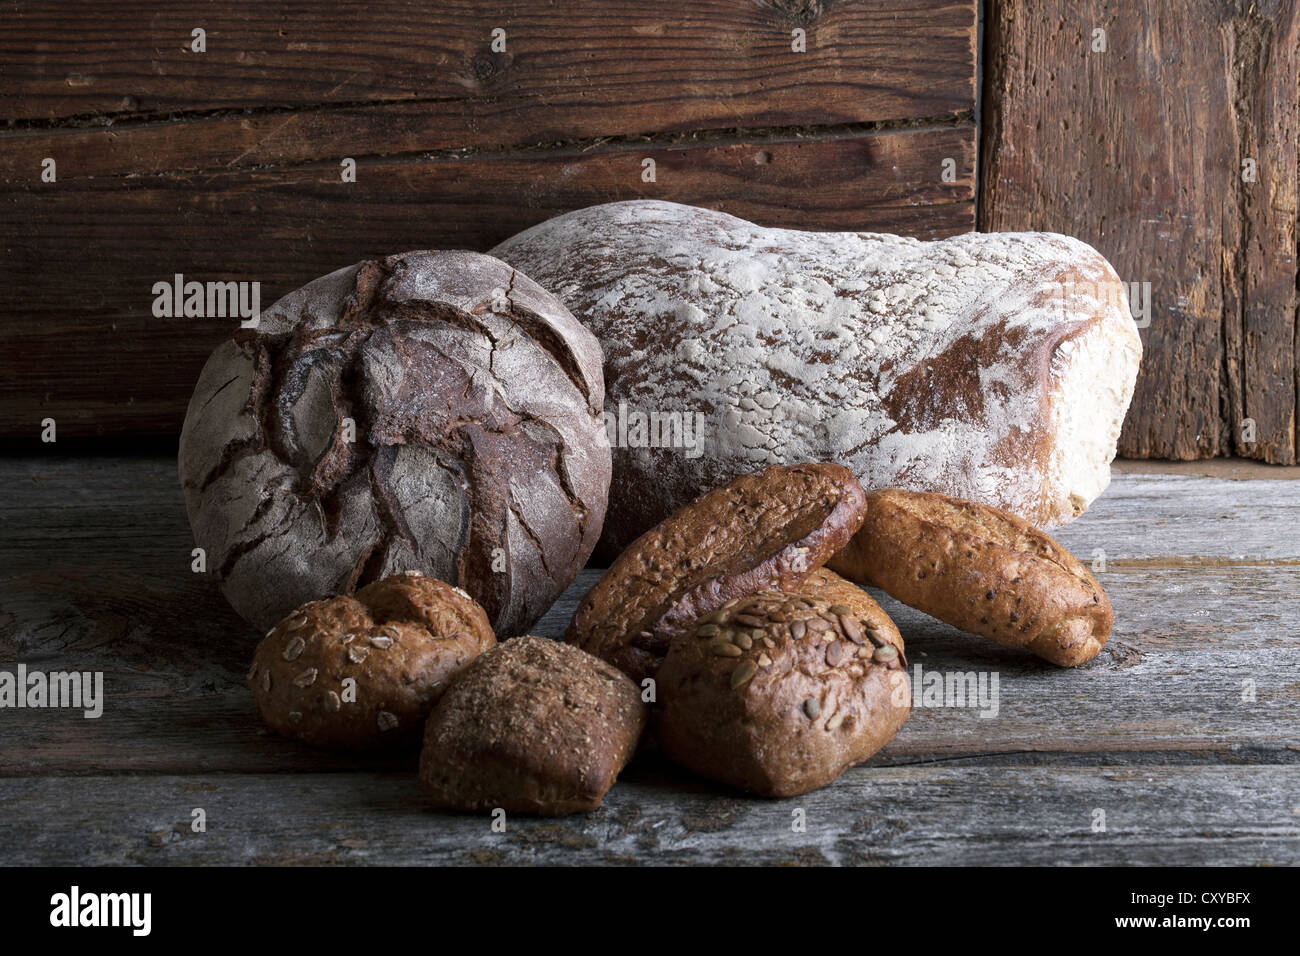 Bread loaves and rolls on a rustic wooden surface Stock Photo